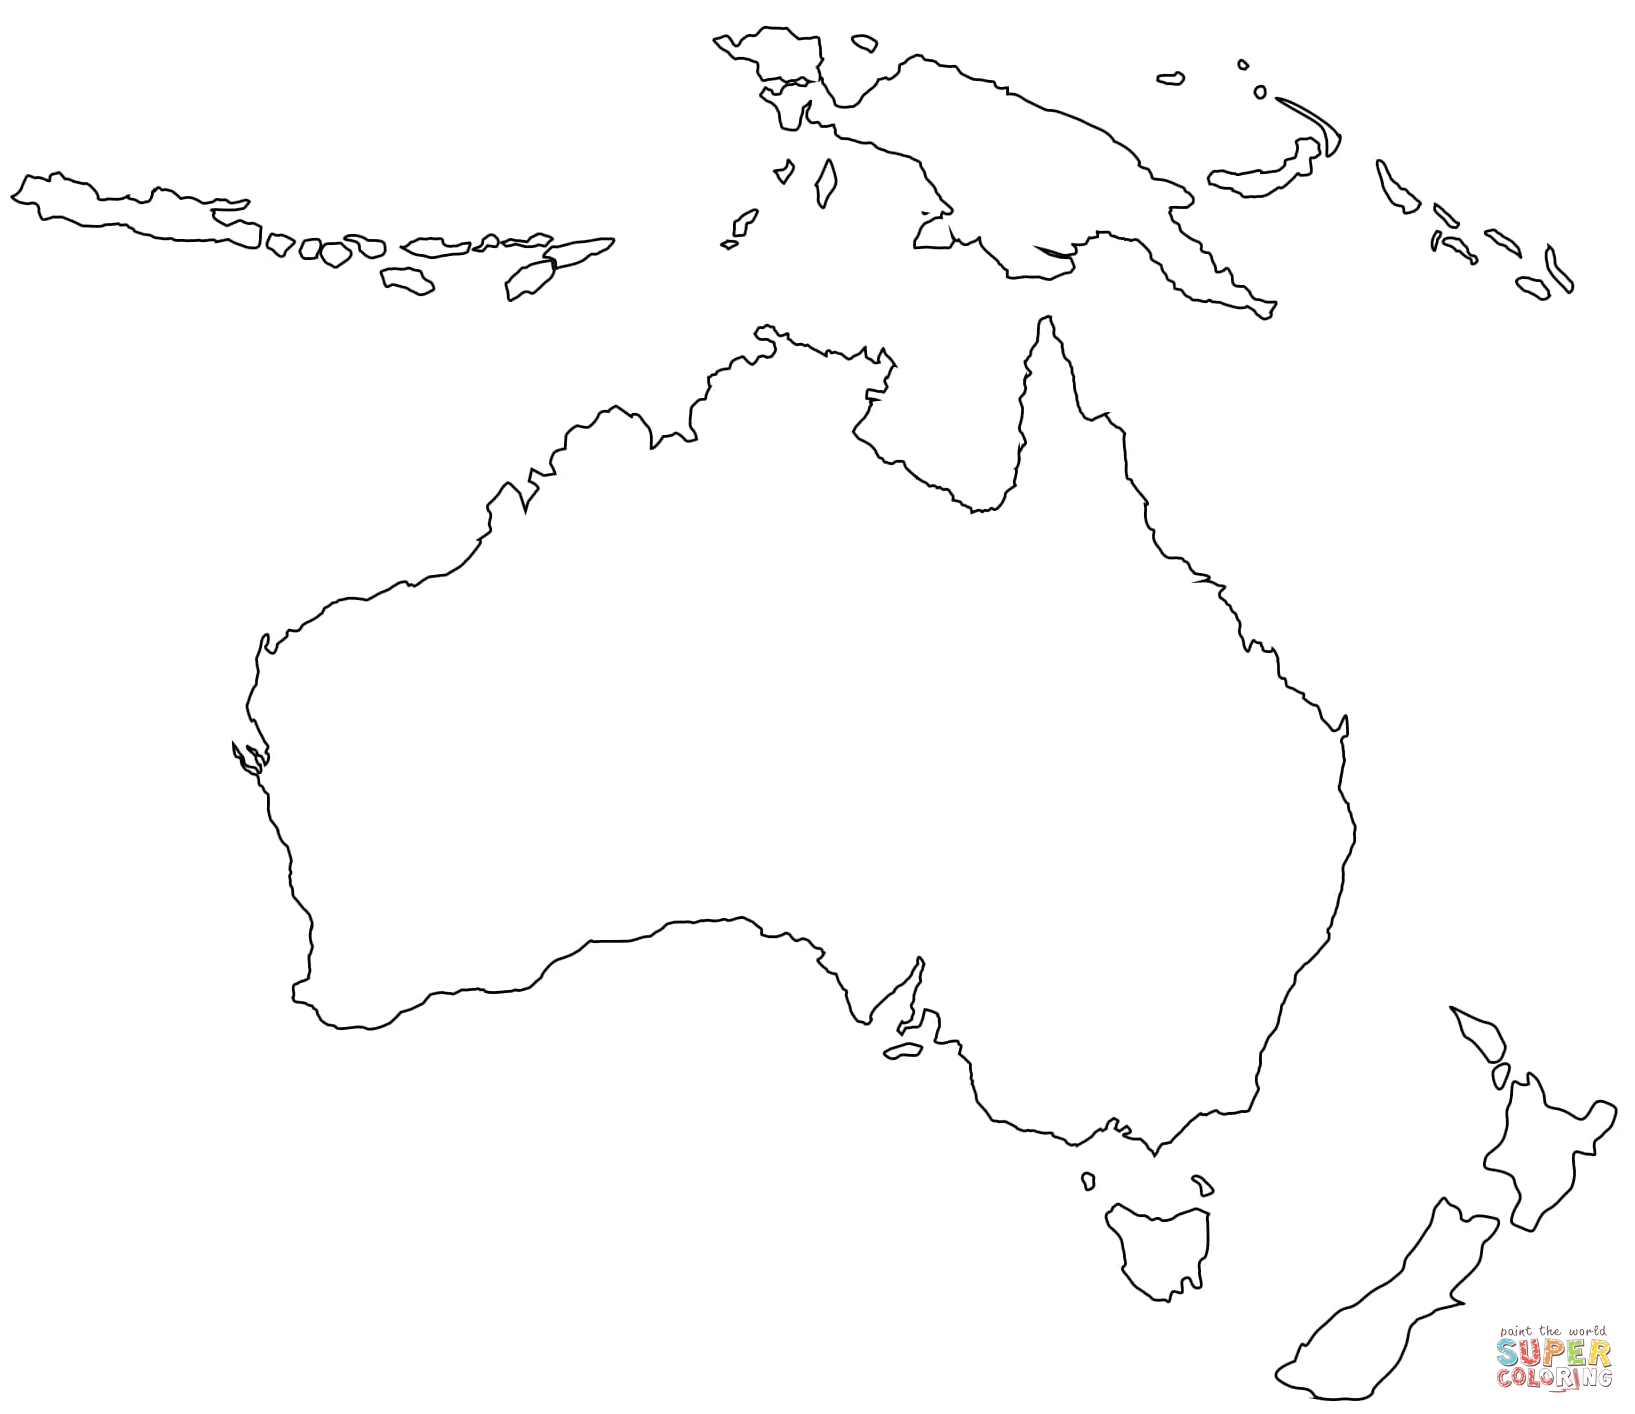 Outline map of australia coloring page free printable coloring pages